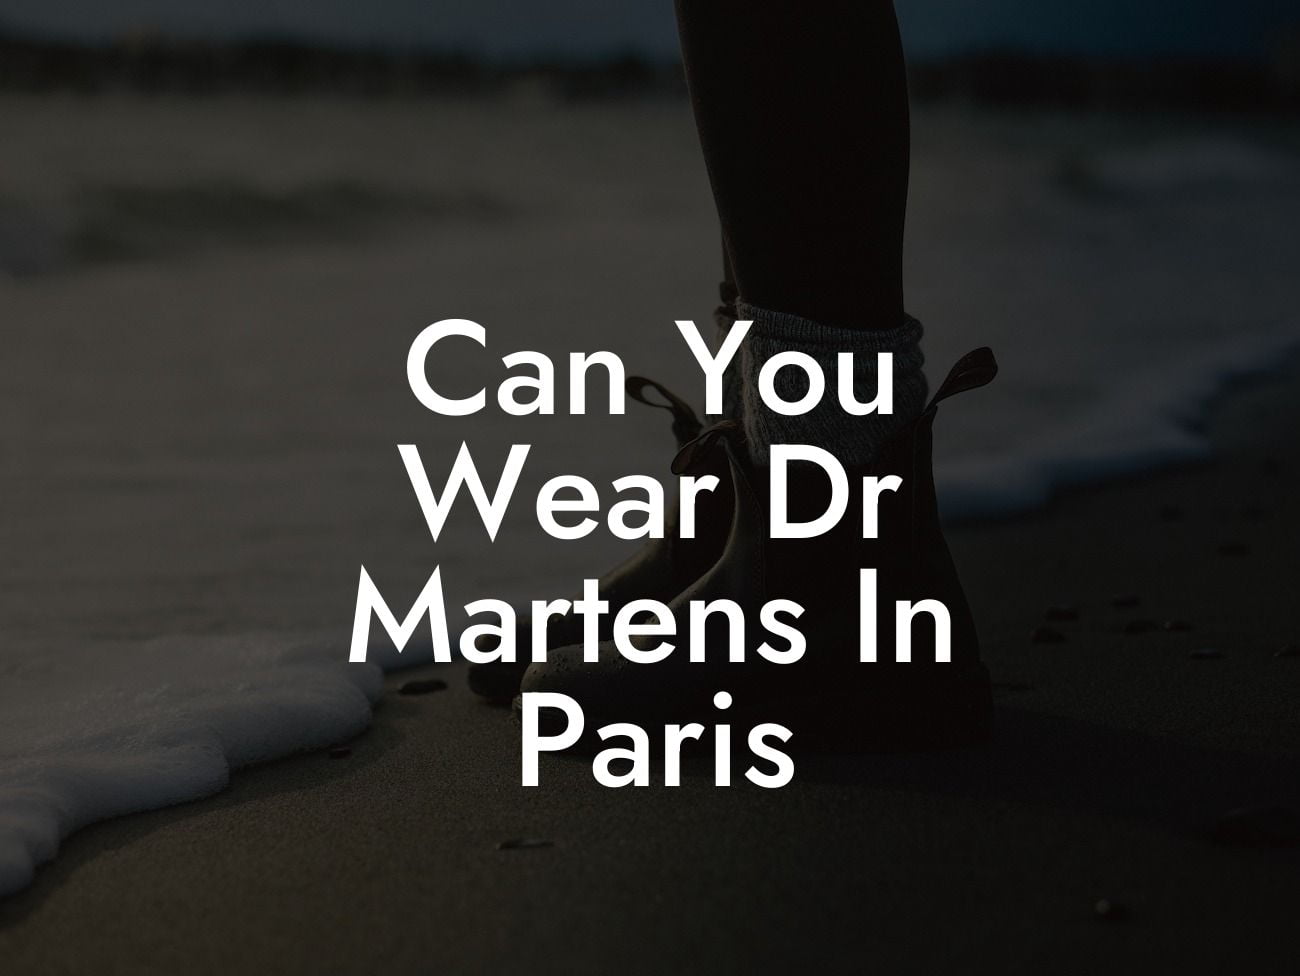 Can You Wear Dr Martens In Paris